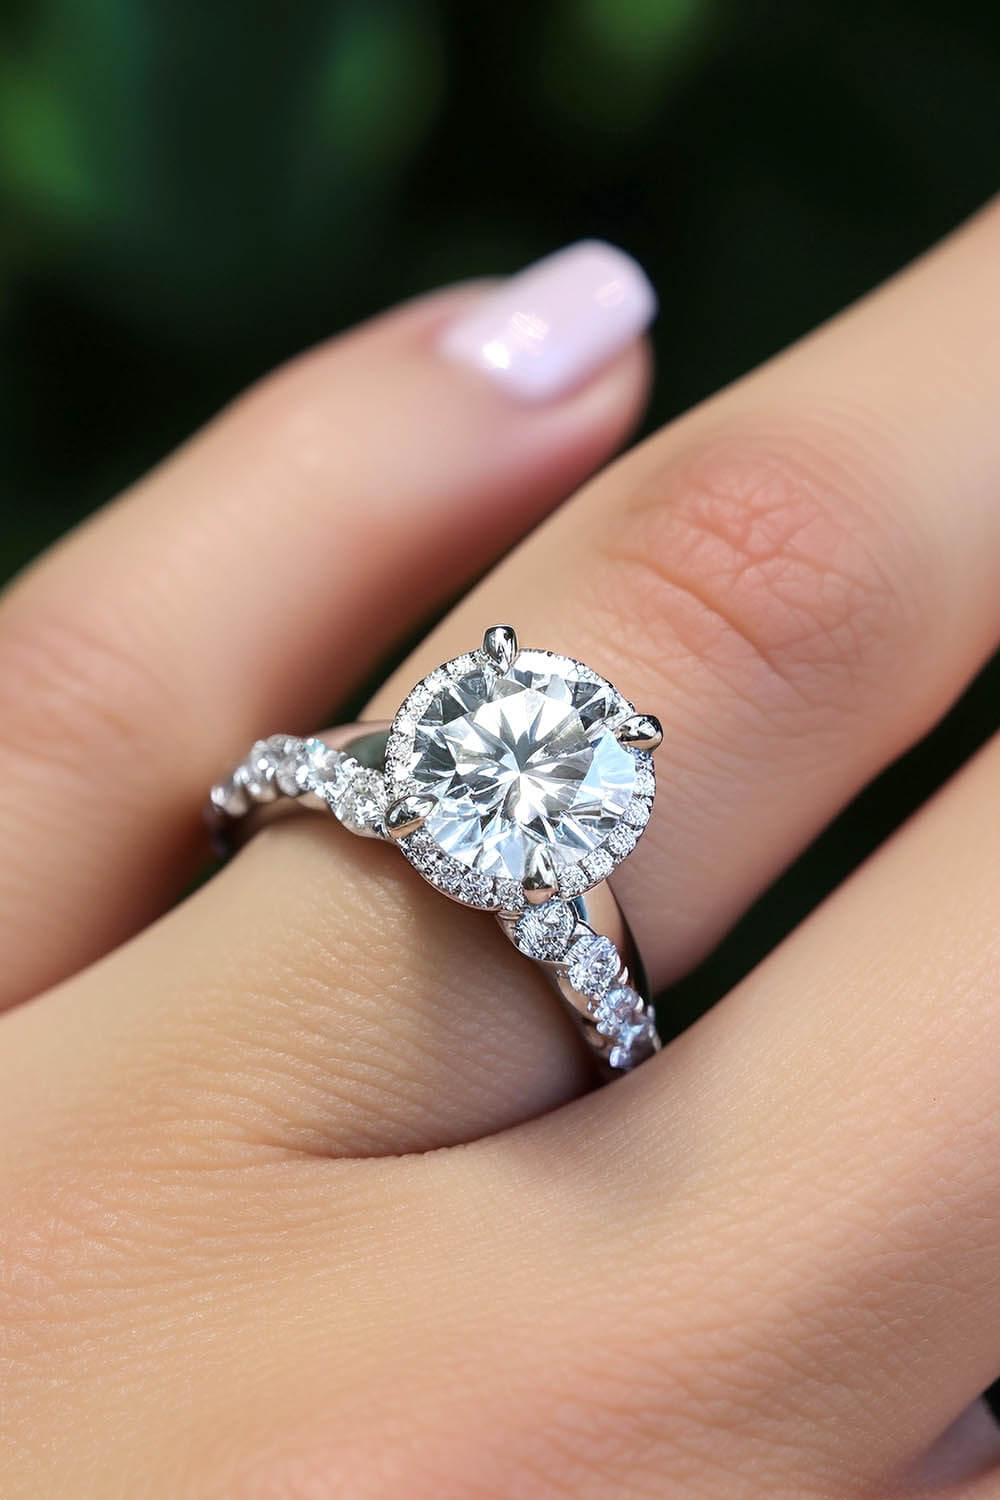 a stunning diamond ring modelled on a hand 